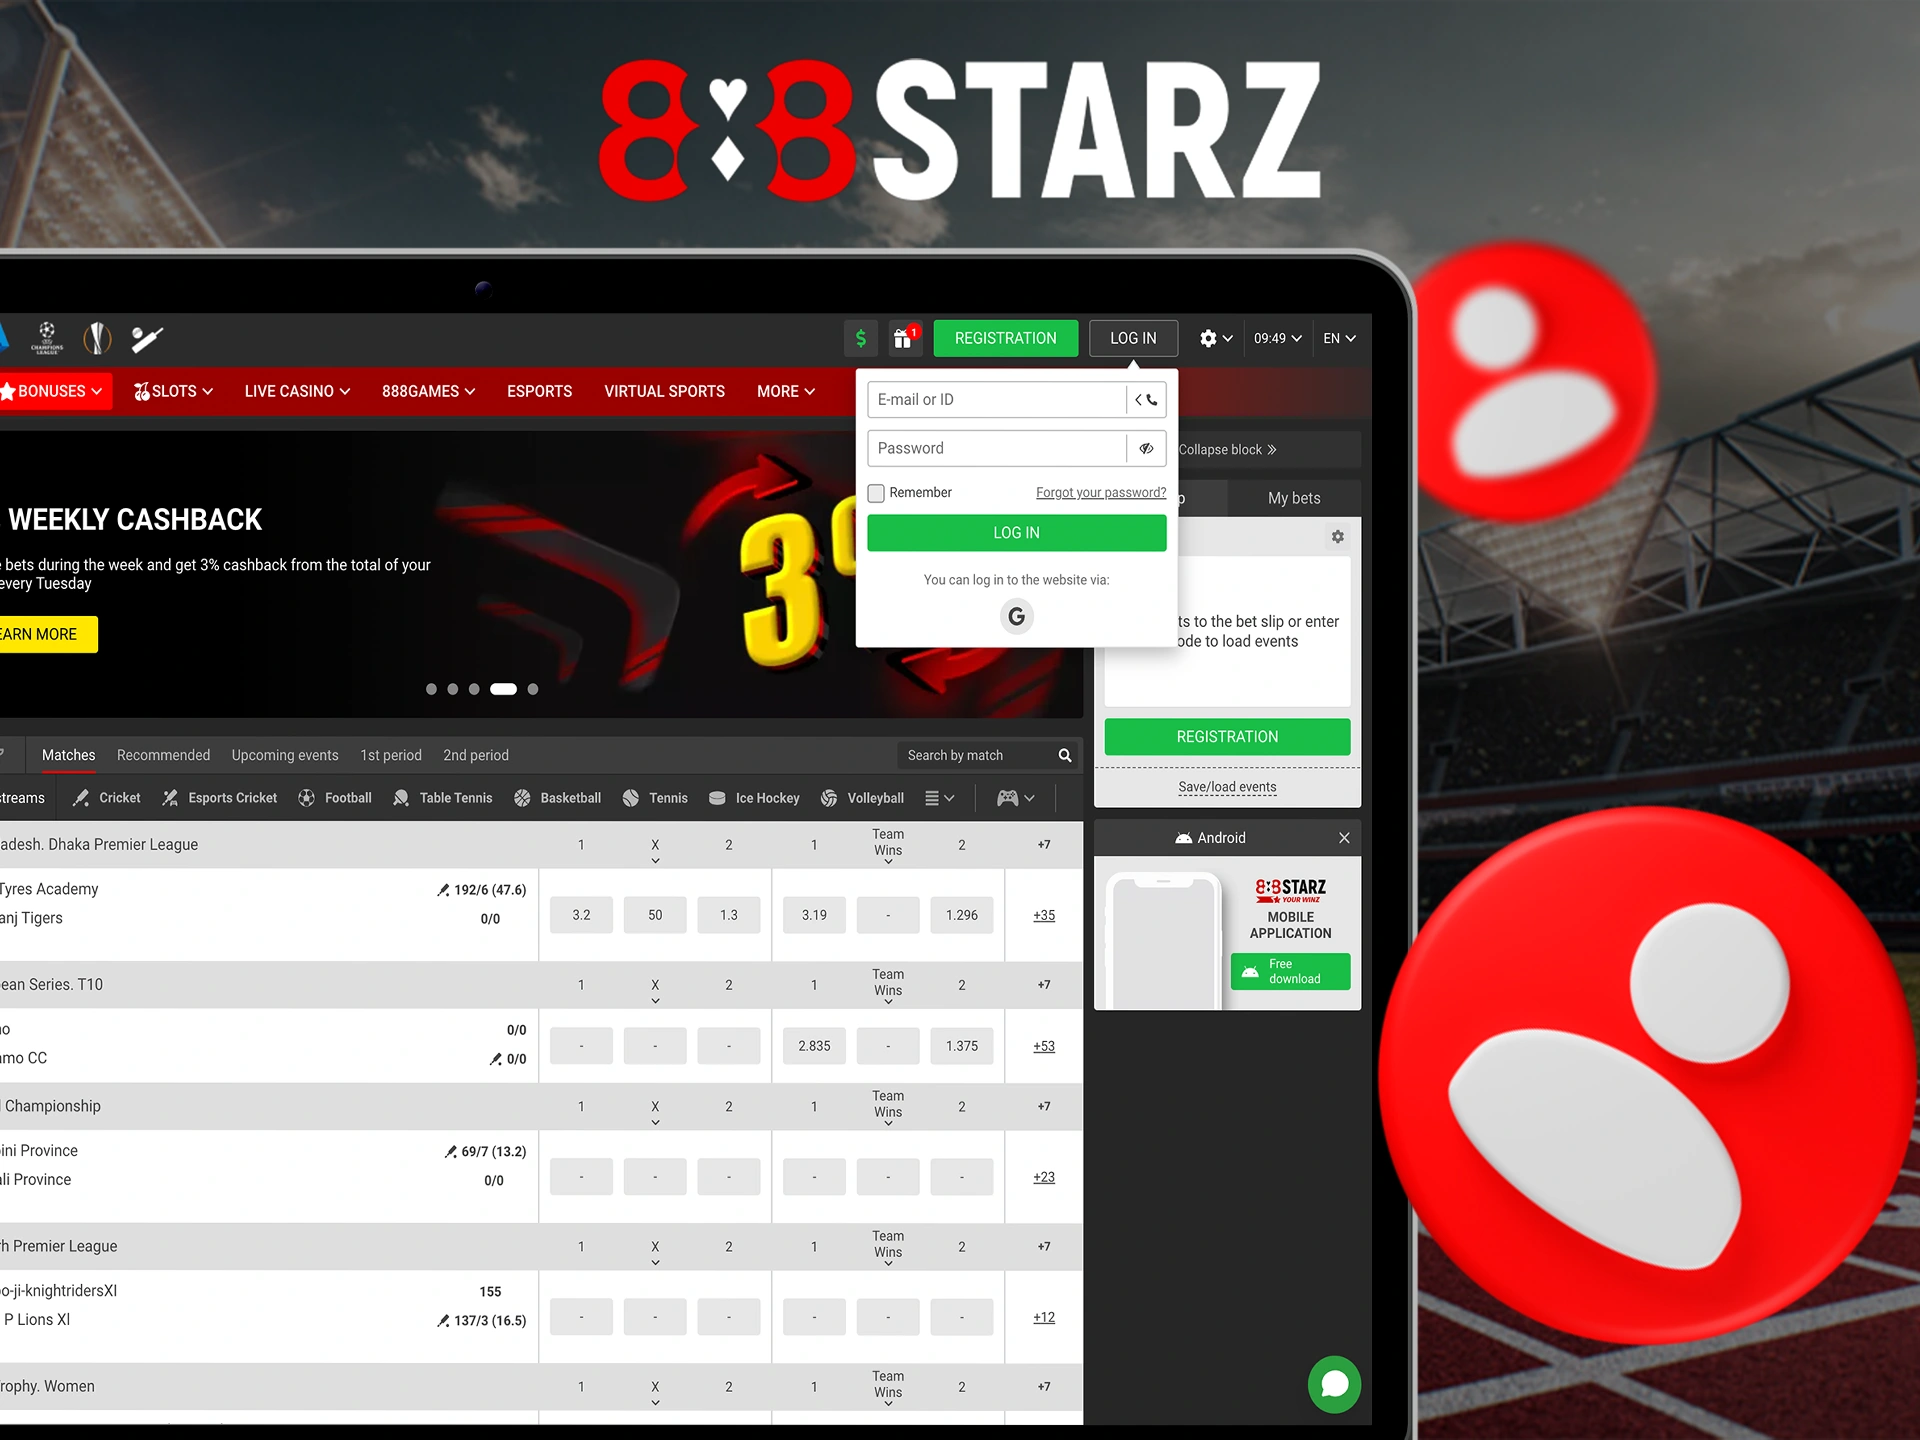 Log in to your 888Starz account and continue placing bets and playing in the online casino